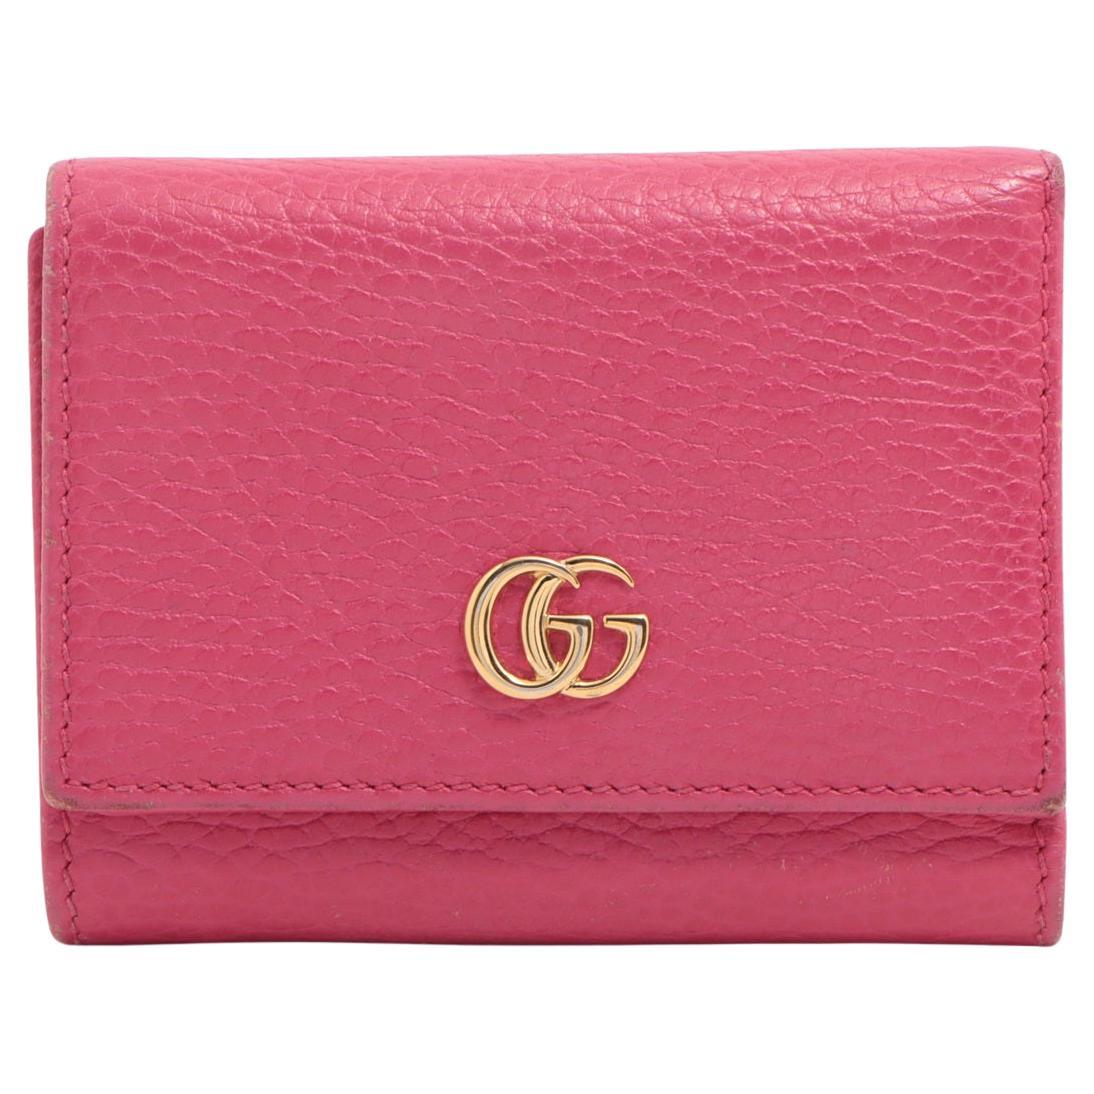 Gucci GG Marmont Leather Compact Wallet Pink For Sale